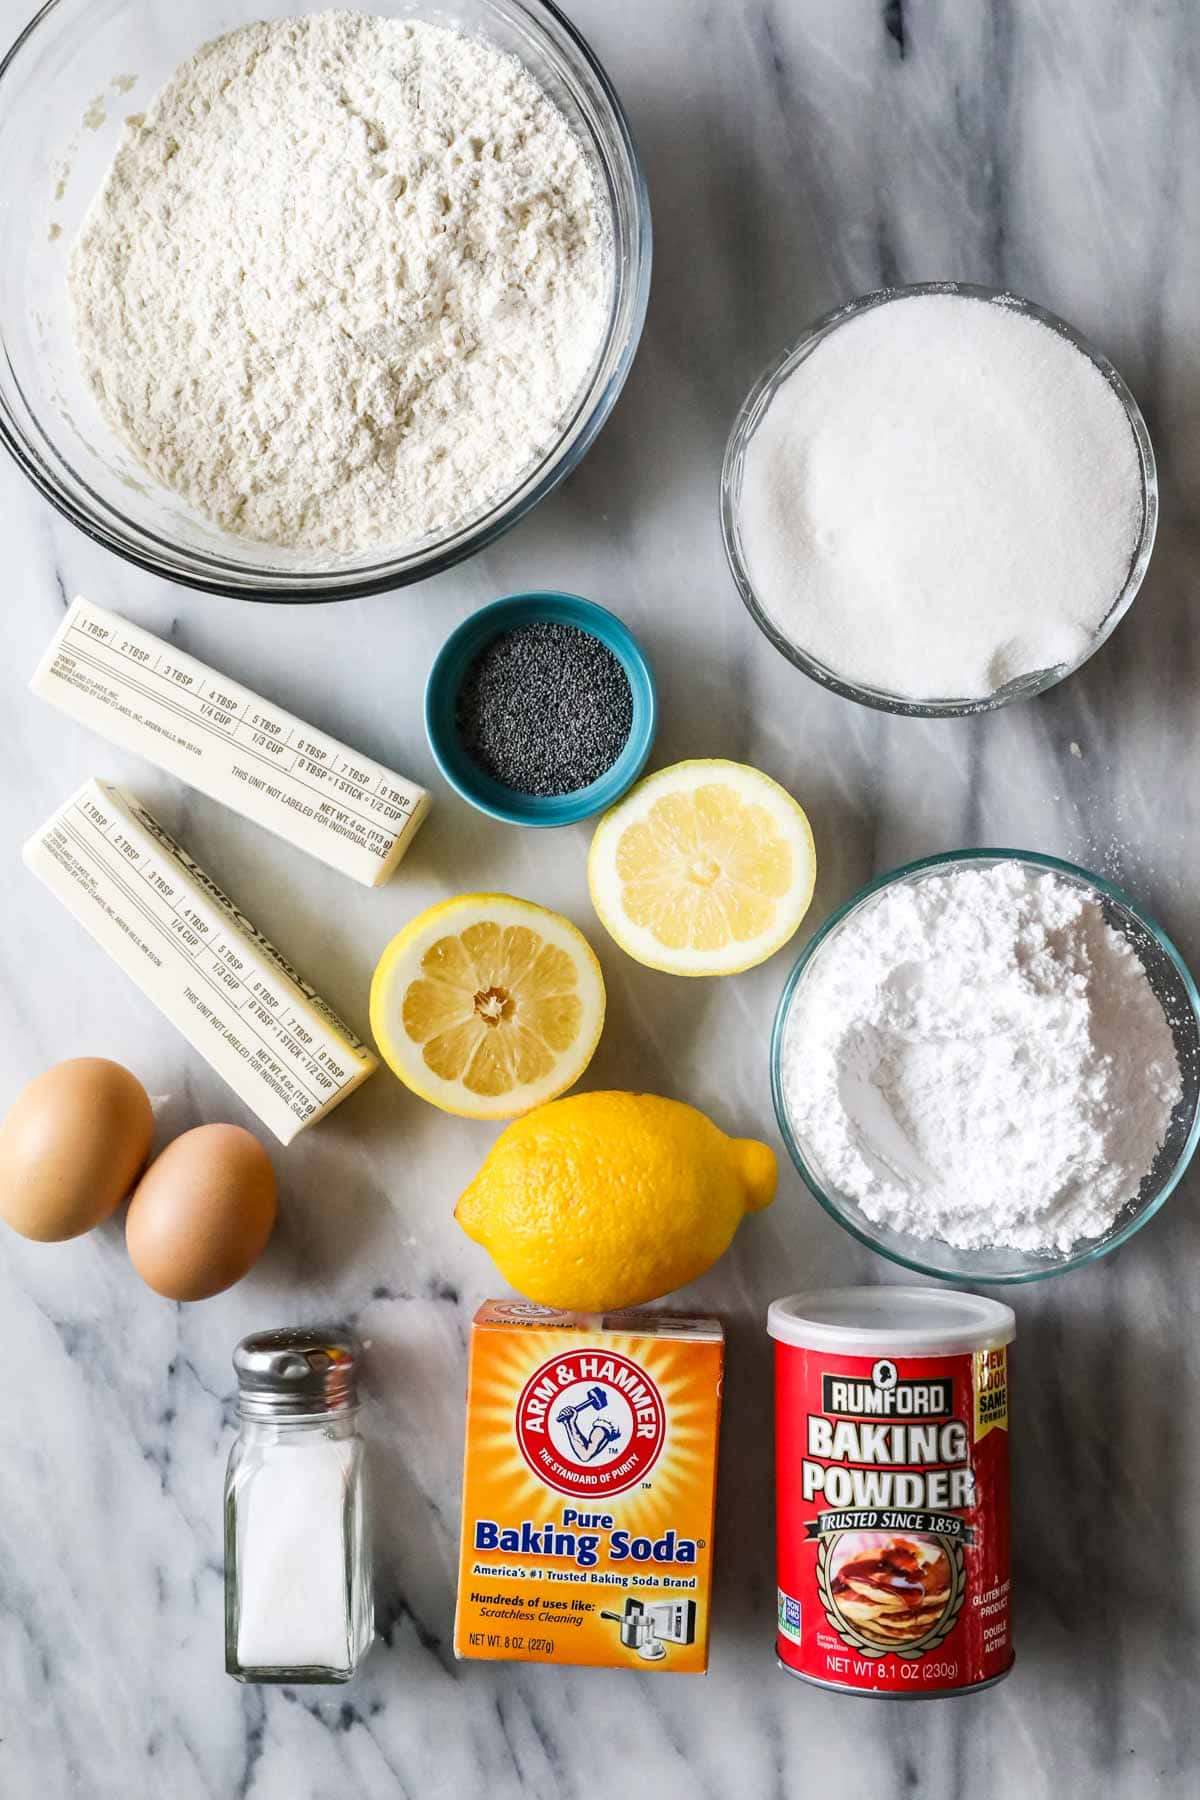 Overhead view of ingredients including flour, butter, lemons, poppy seeds, and more.